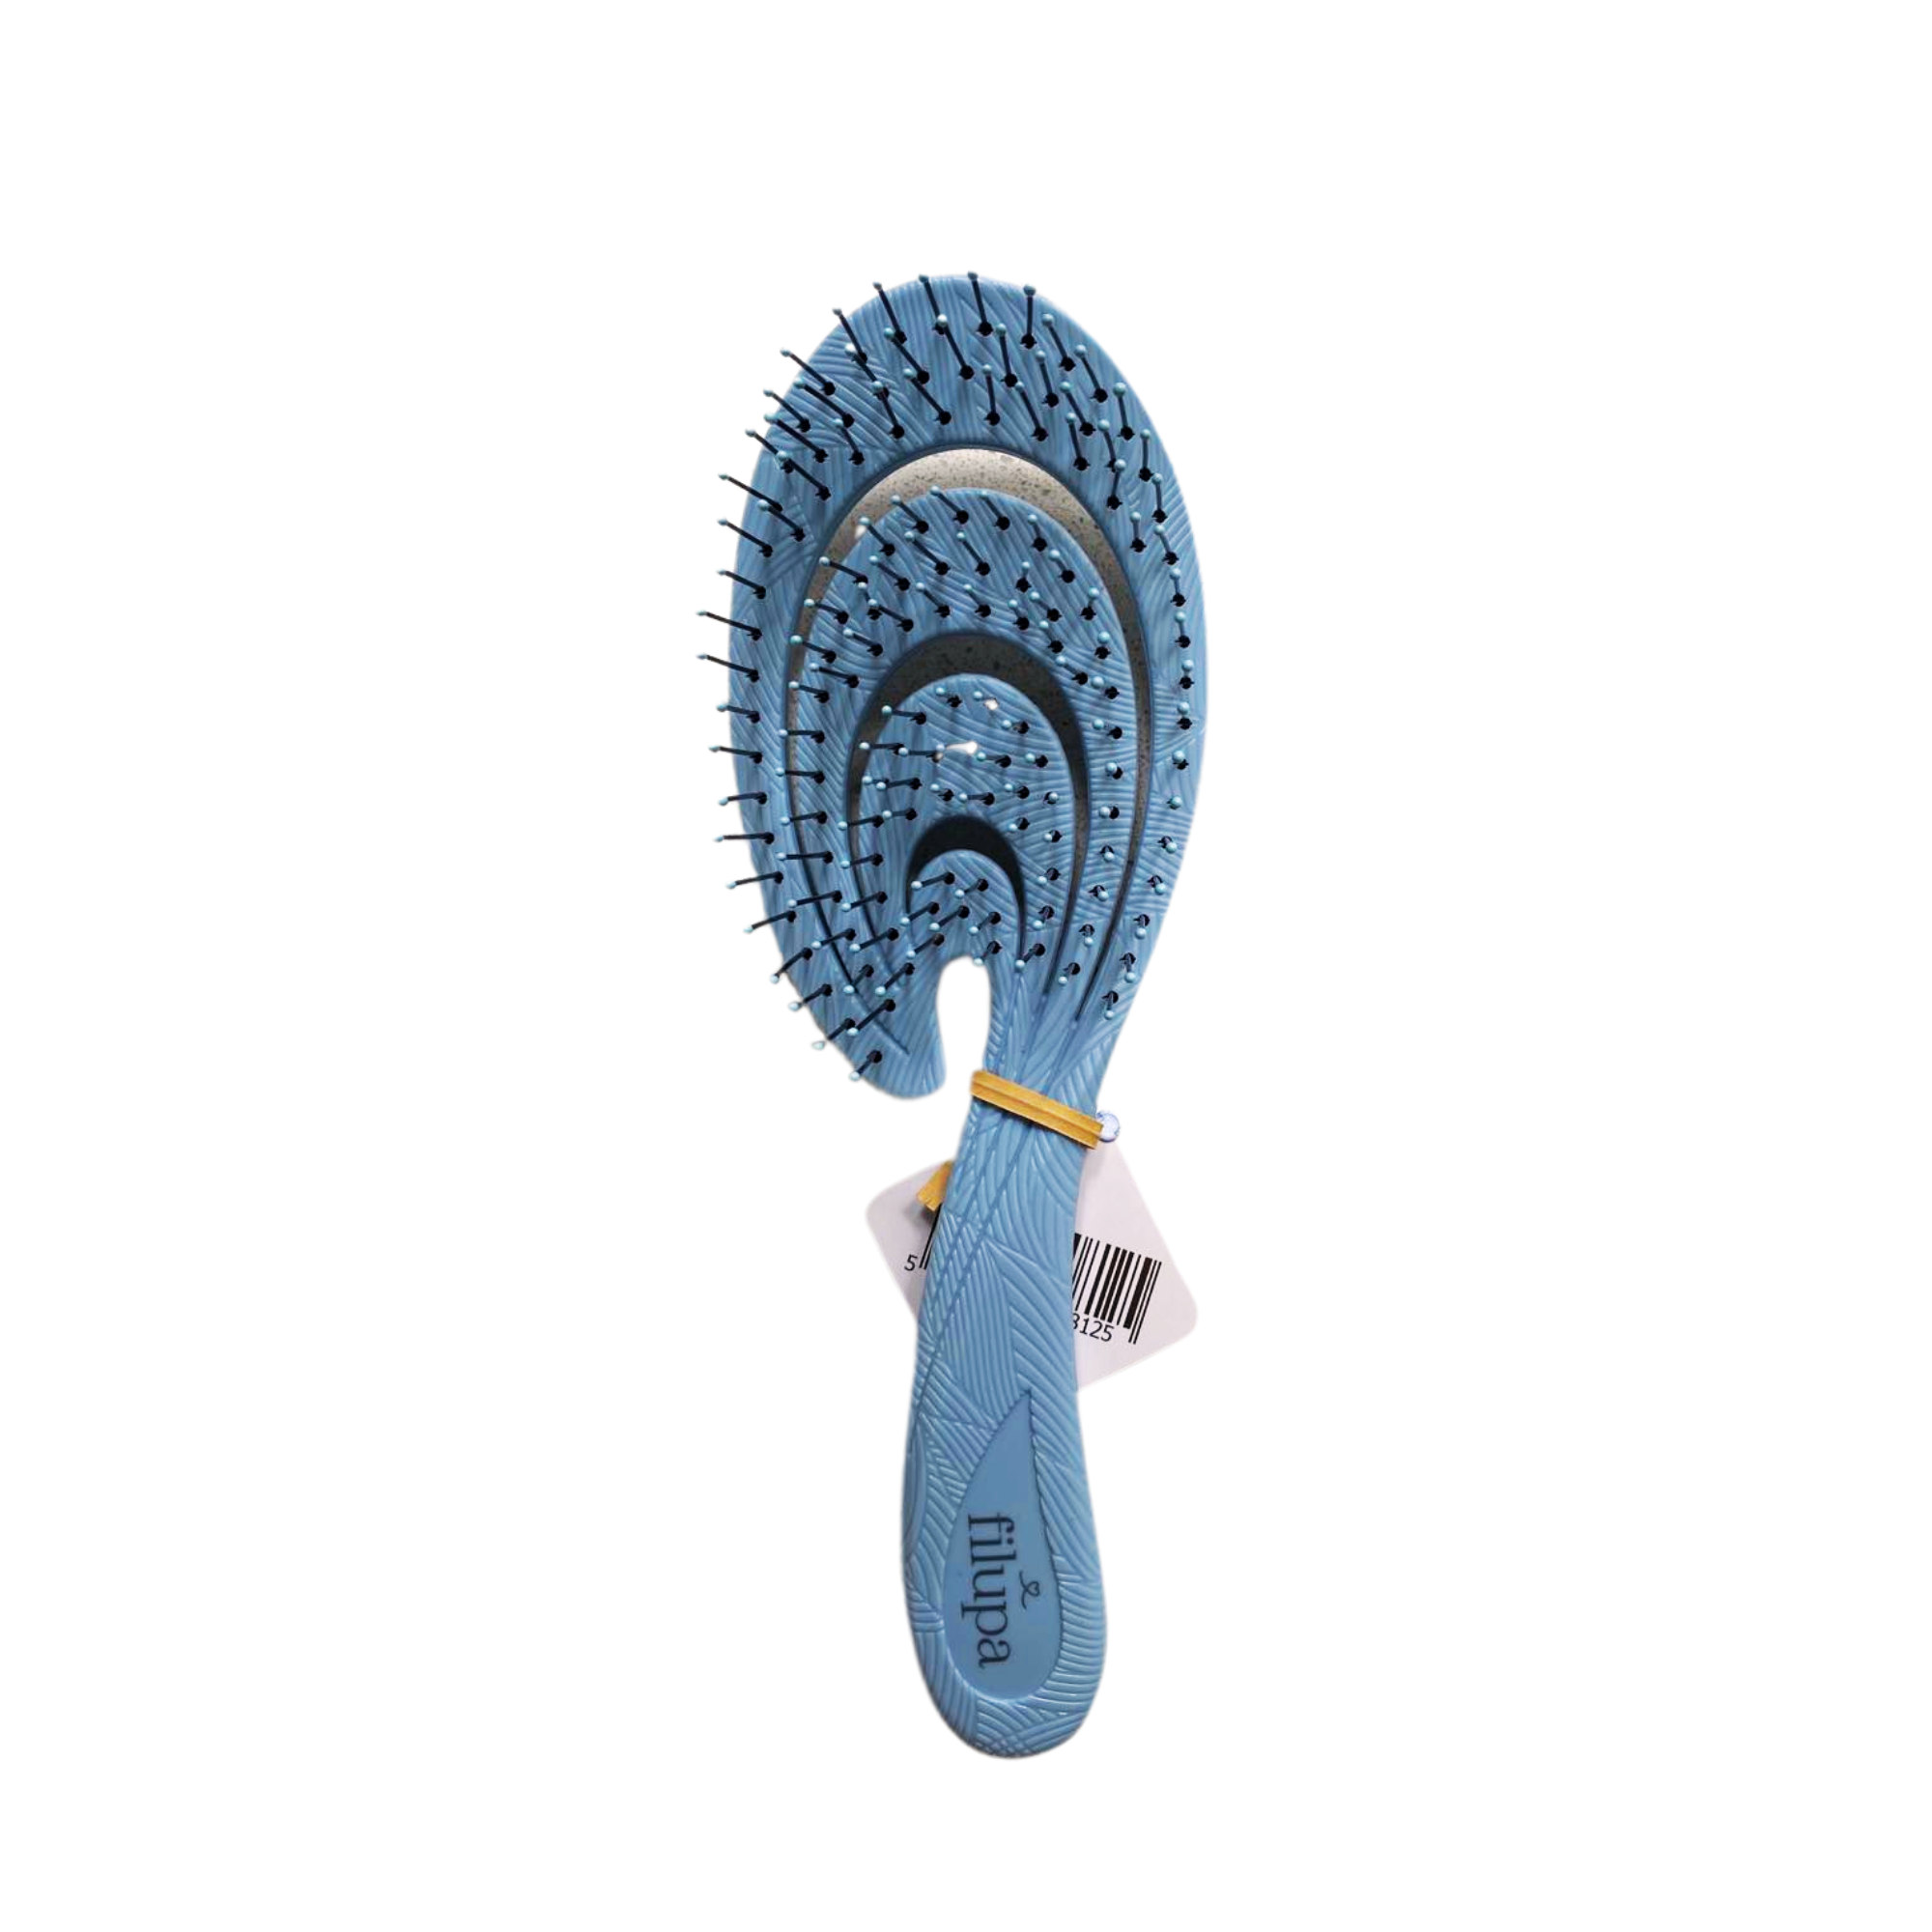 Filupa Blue Brush from Nordic Bio Brush is 100% recyclable. The brush won't pull on your hair and smoothes the finer hair with ease.